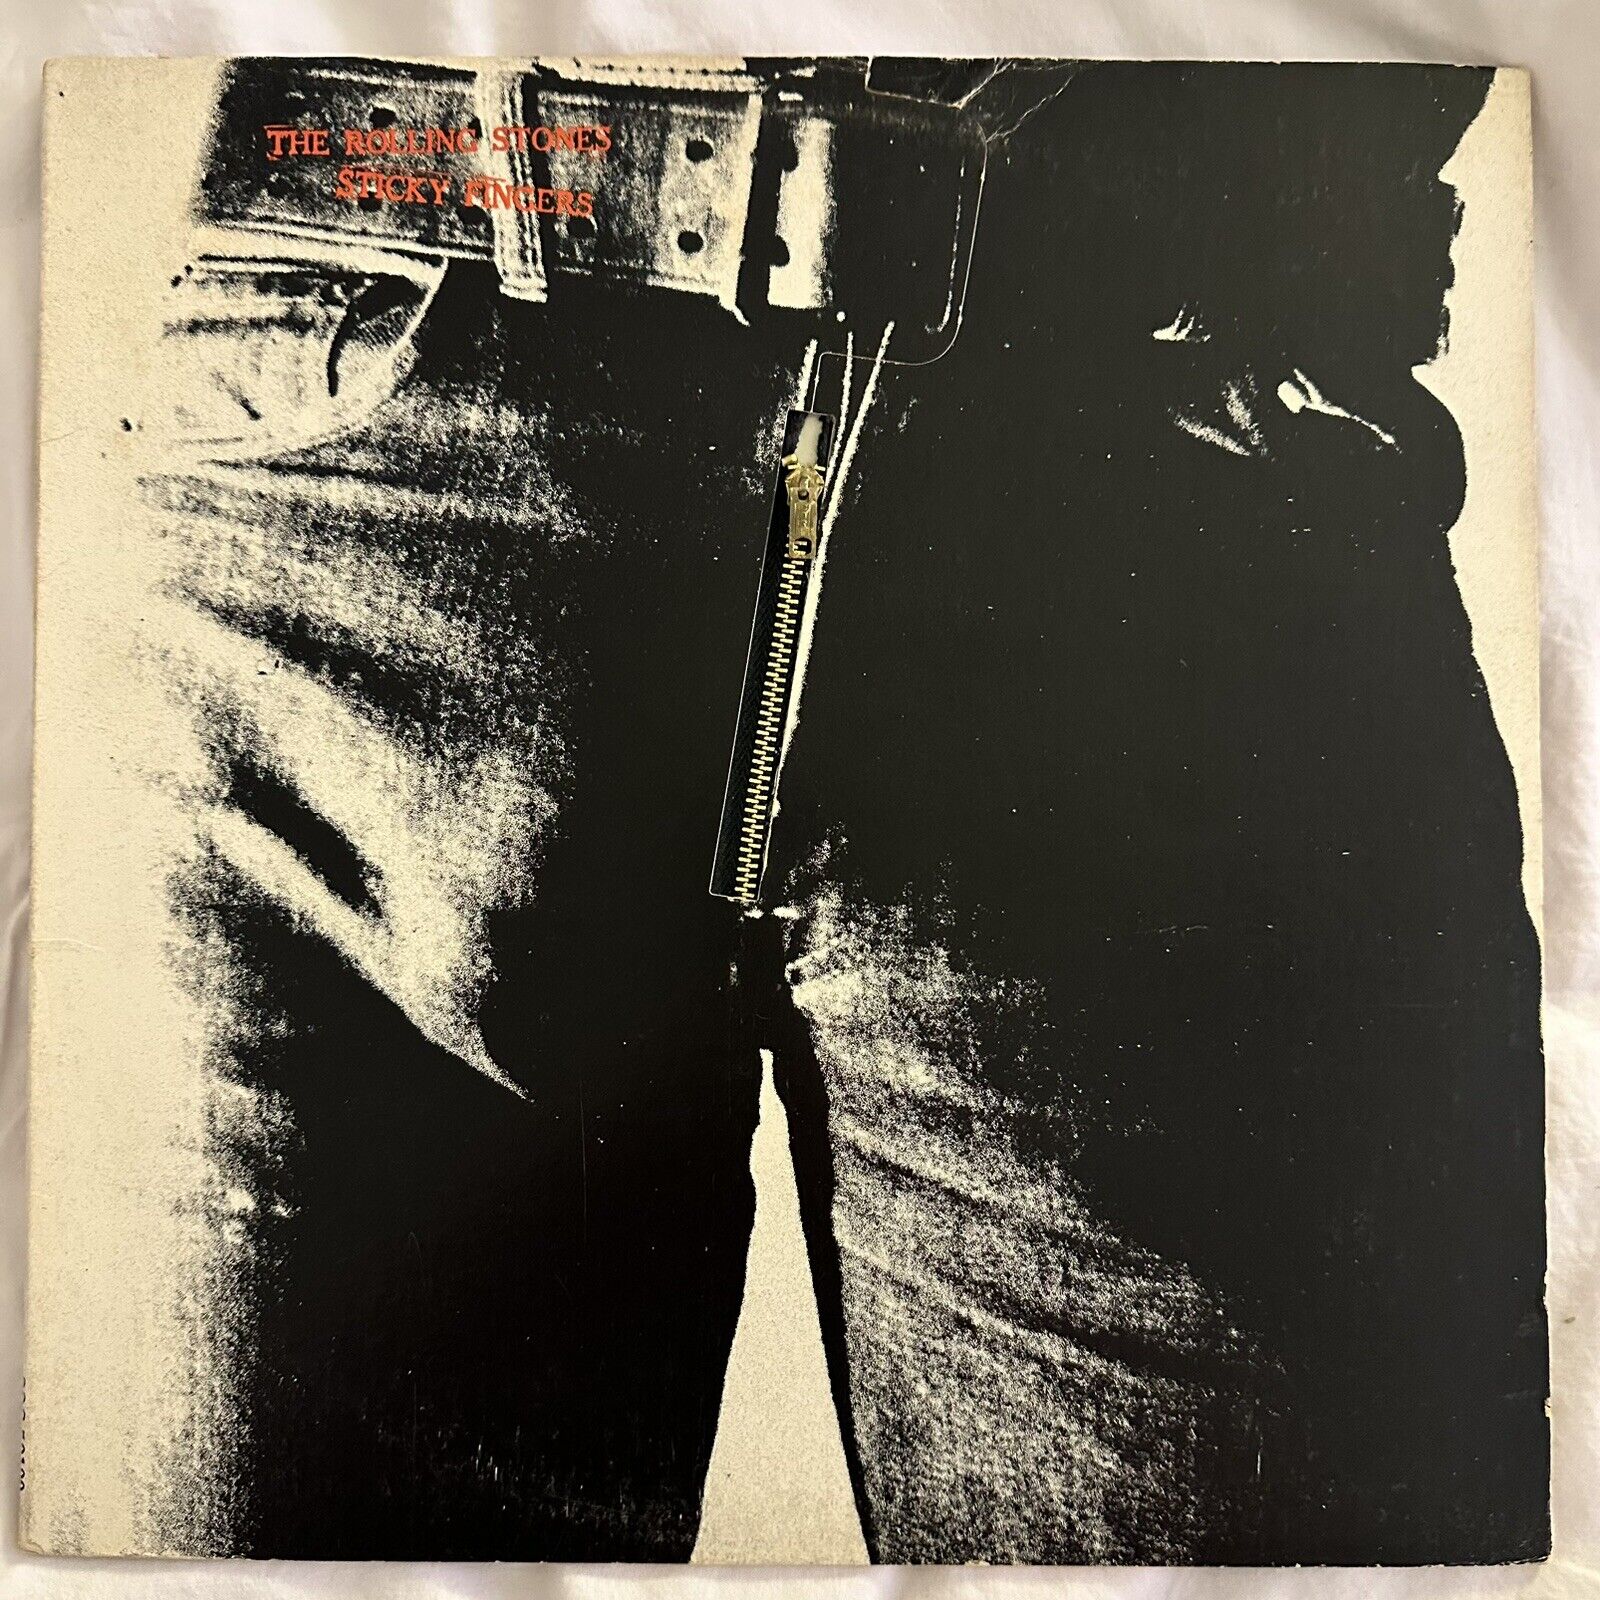 ROLLING STONES STICKY FINGERS 1973 PRESS COC 59100 PRESWELL VG+